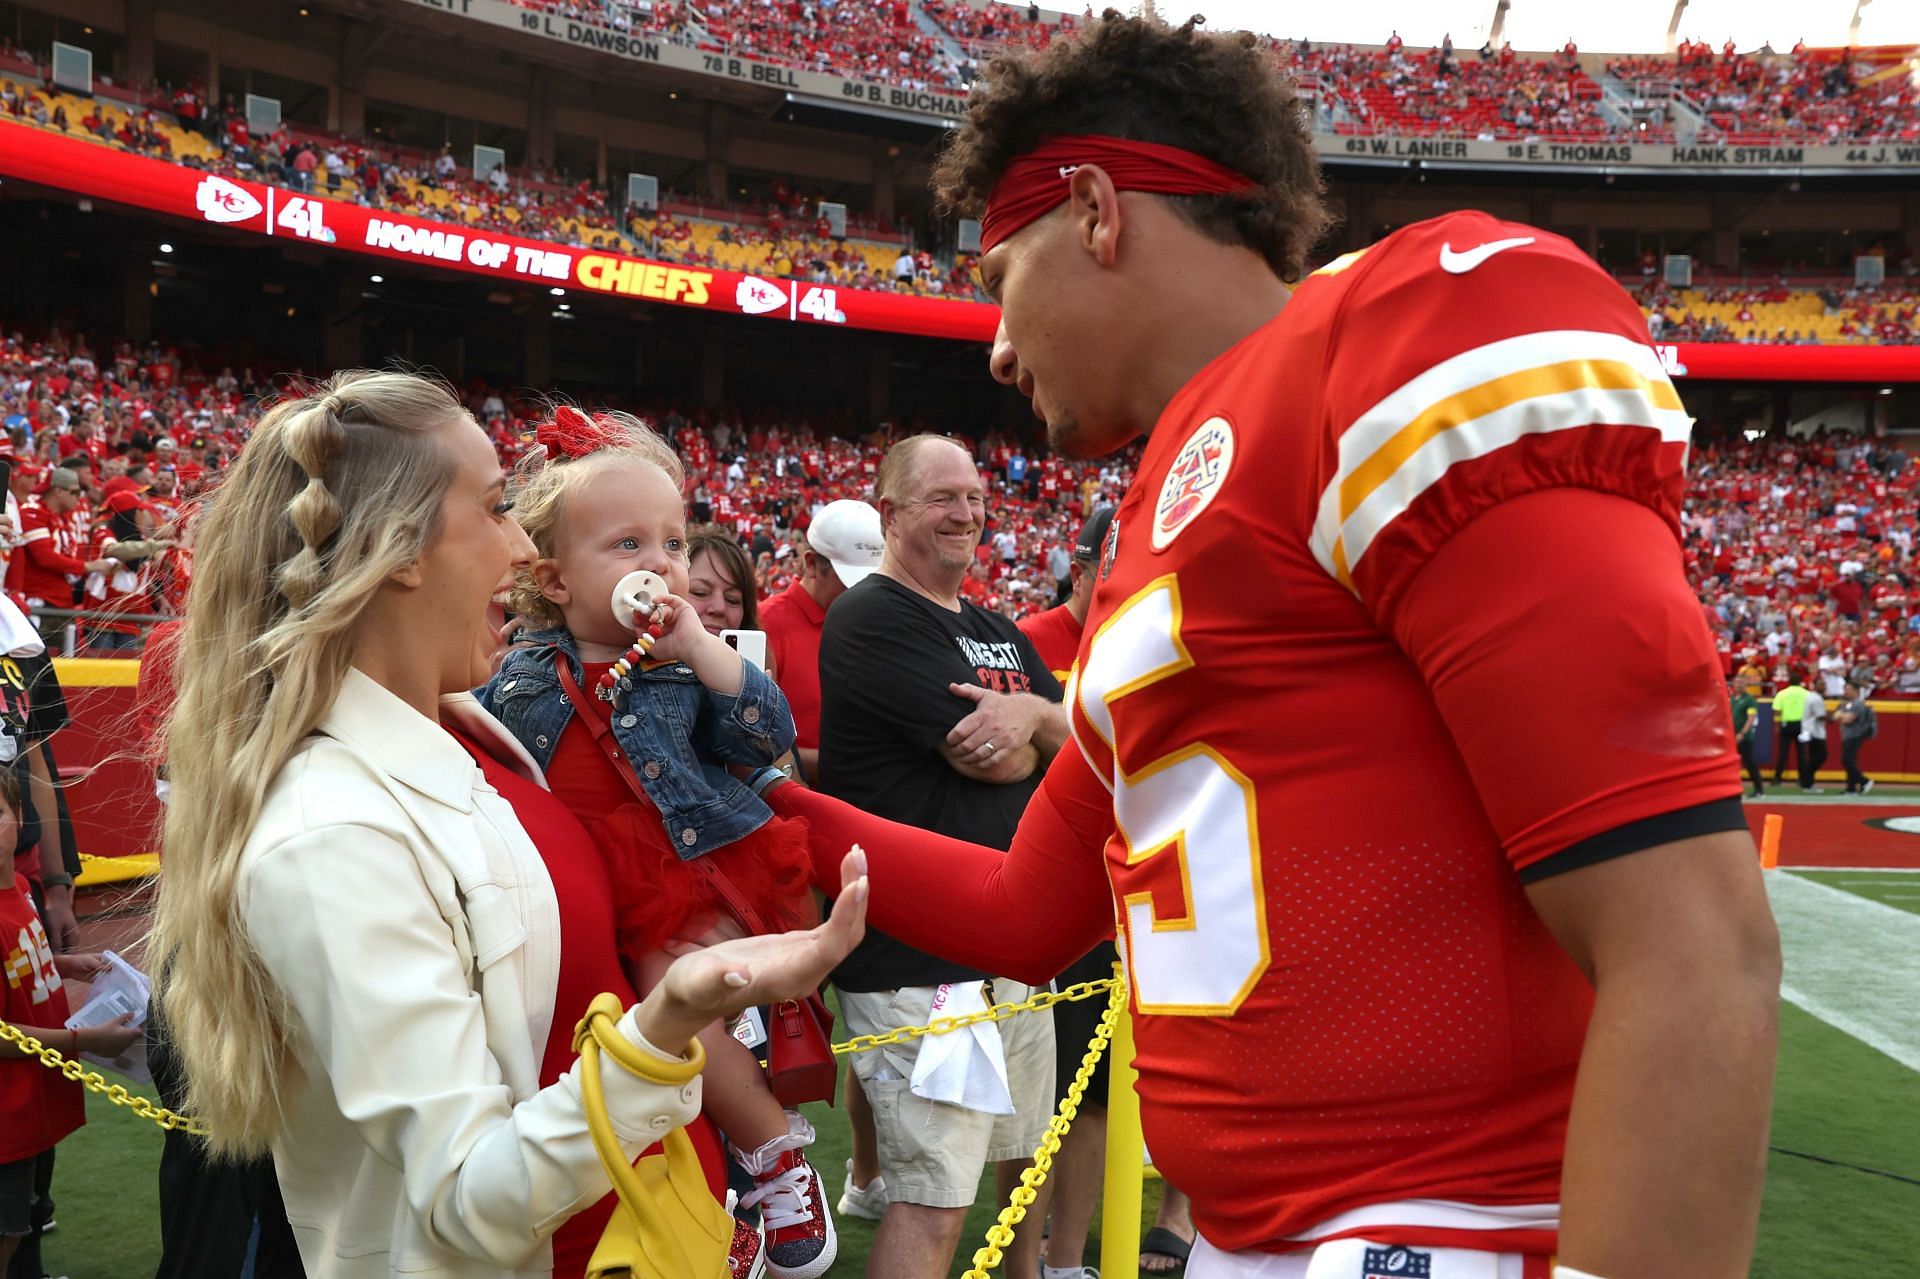 Brittany Mahomes' recent tweet angers fans